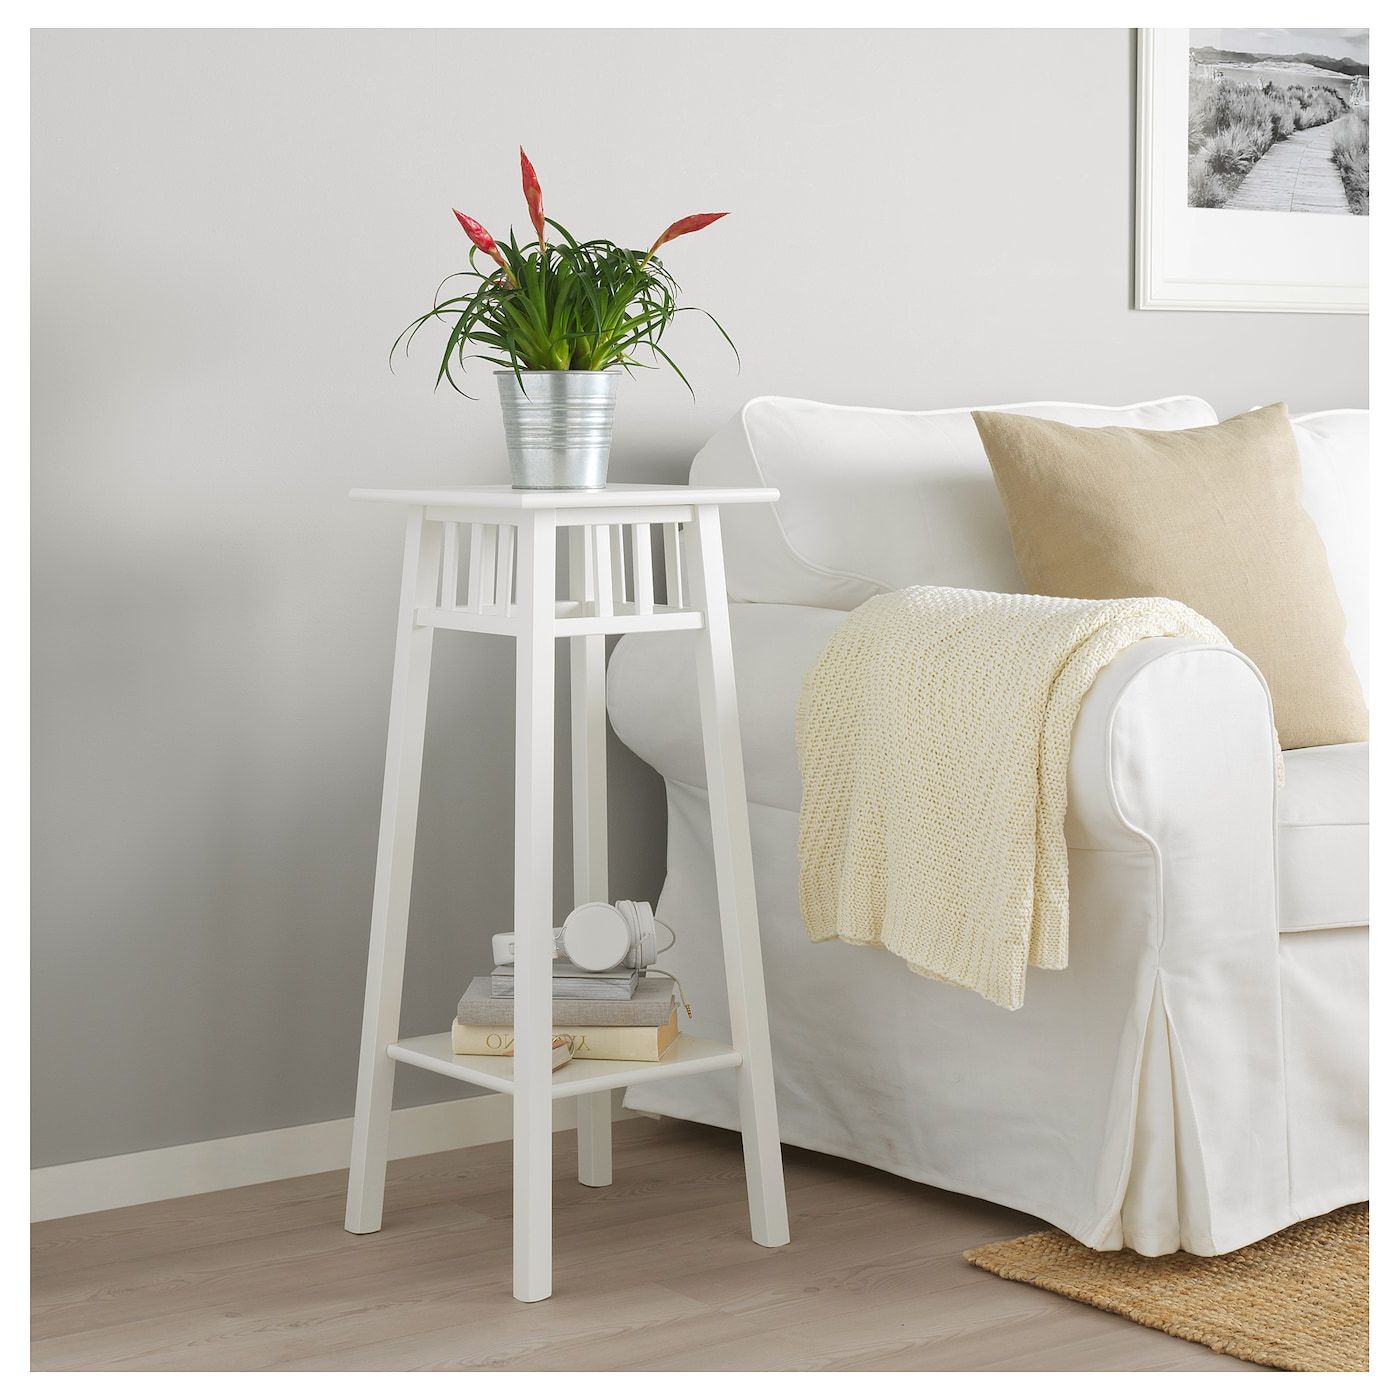 White Plant Stands Regarding Most Recent Lantliv Plant Stand, White, 78 Cm – Ikea Ireland (View 9 of 10)